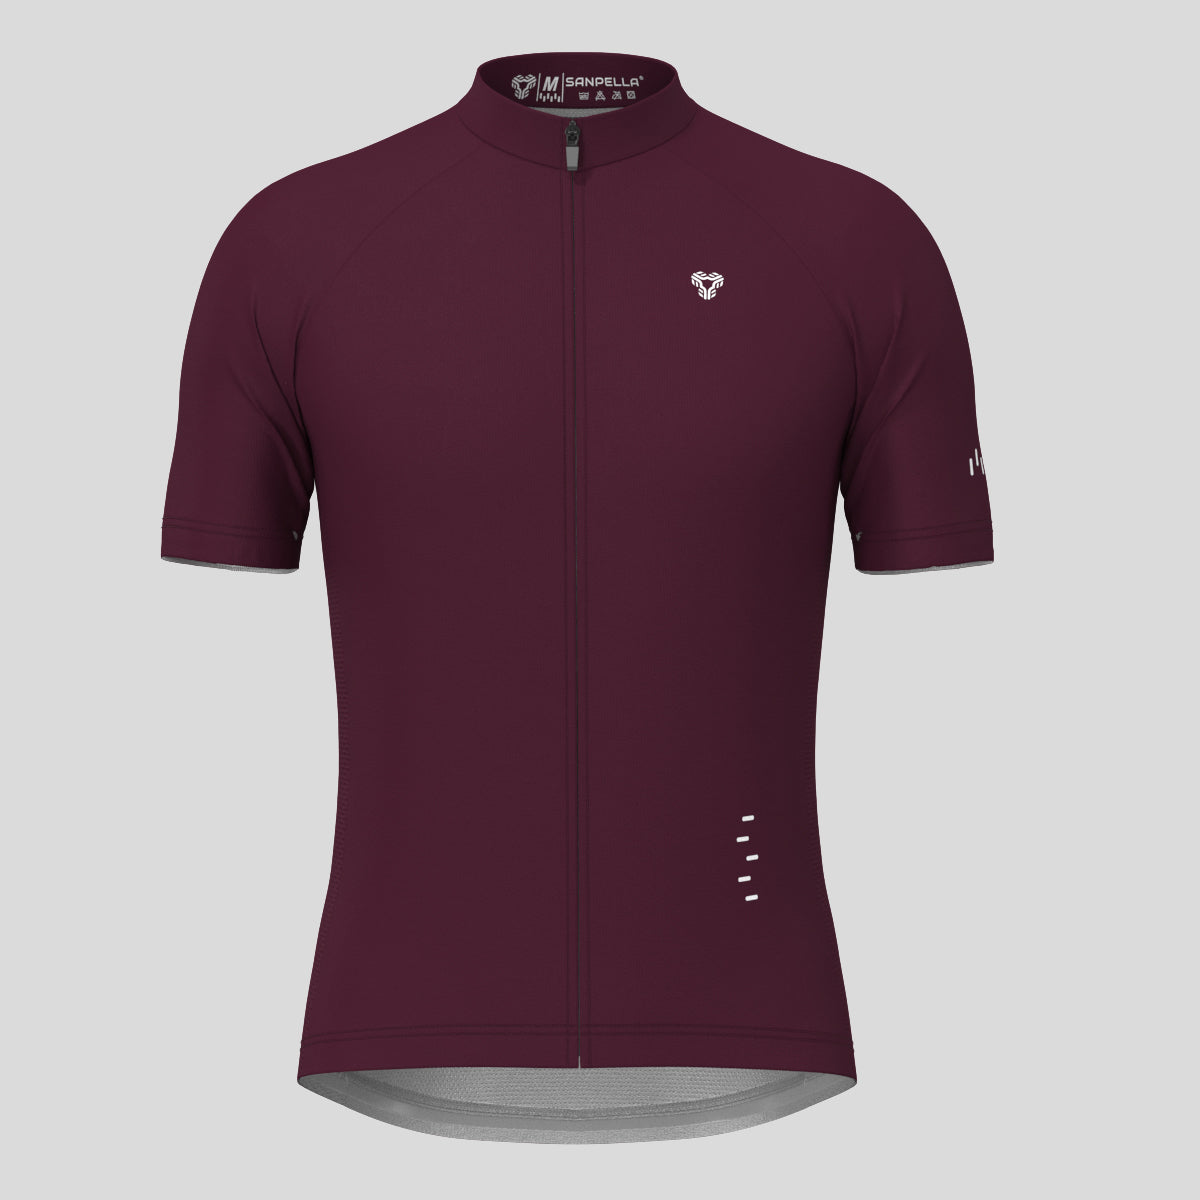 Men's Minimal Solid Cycling Jersey -Burgundy